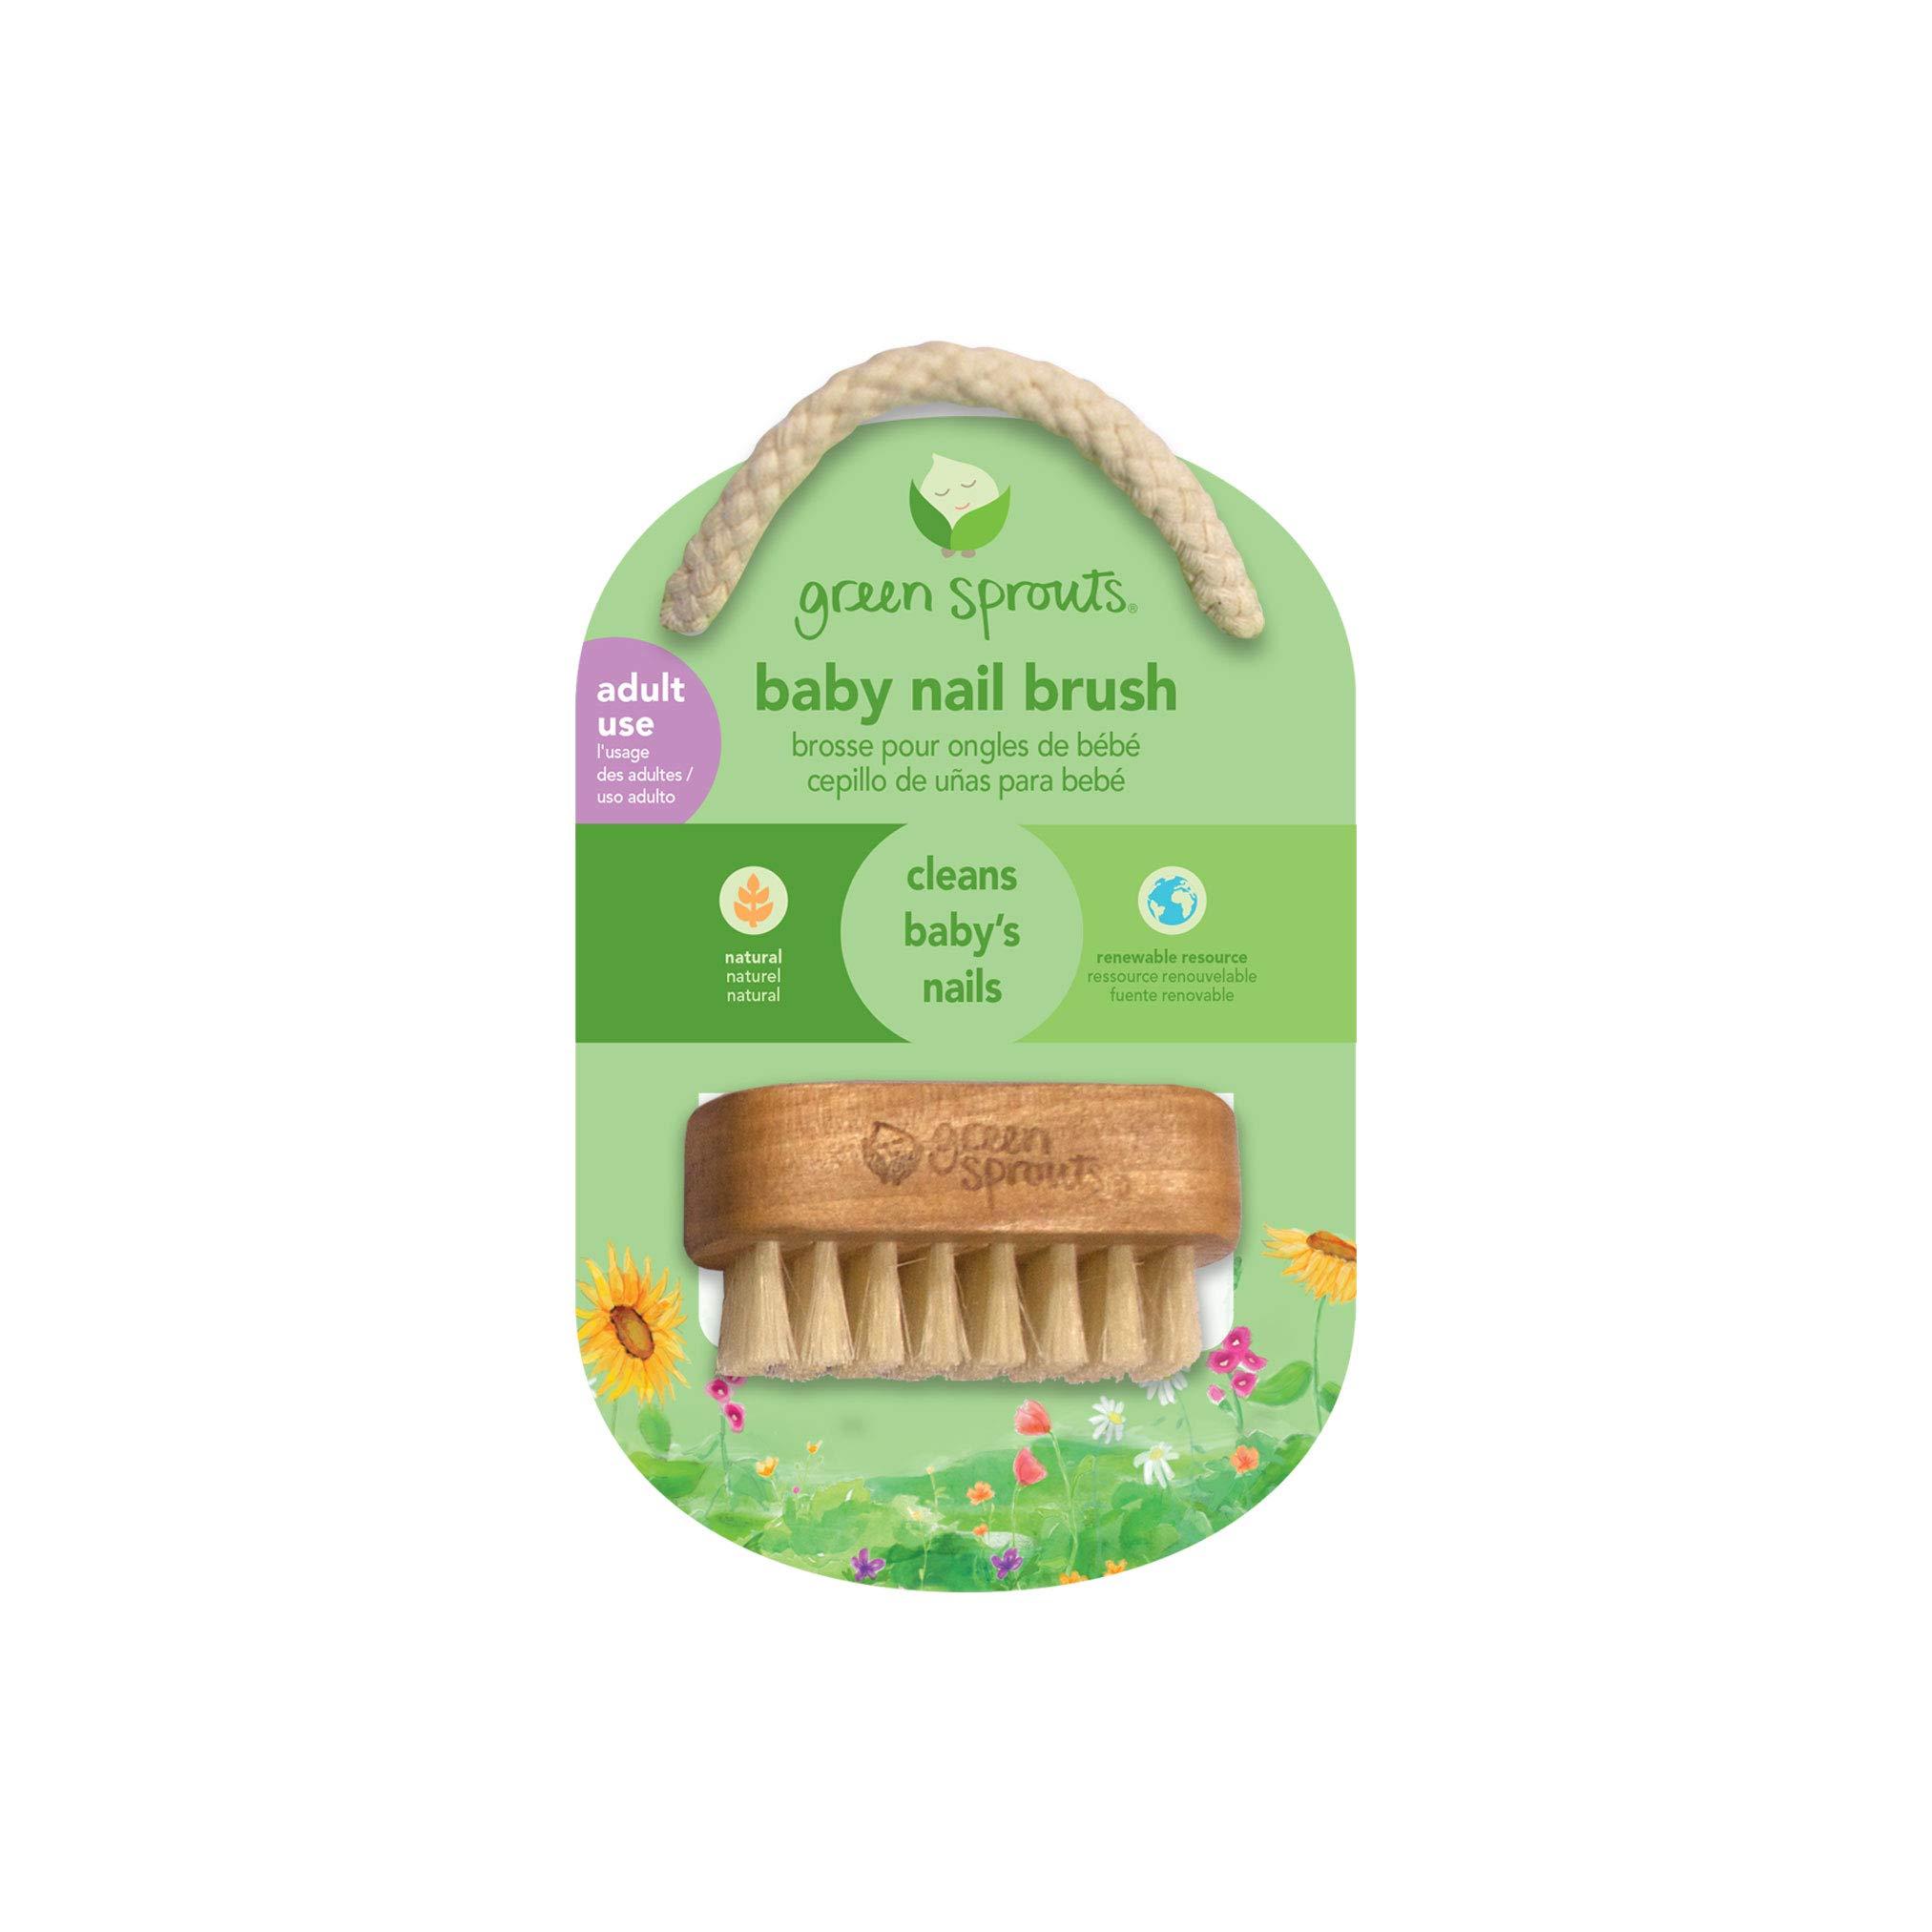 green sprouts Baby Nail Brush, Gently Cleans Baby’s Nails, Soft, Natural bristles for Comfort, Easy to Grasp Wood Handle, Made from Natural, Non-Petroleum Materials